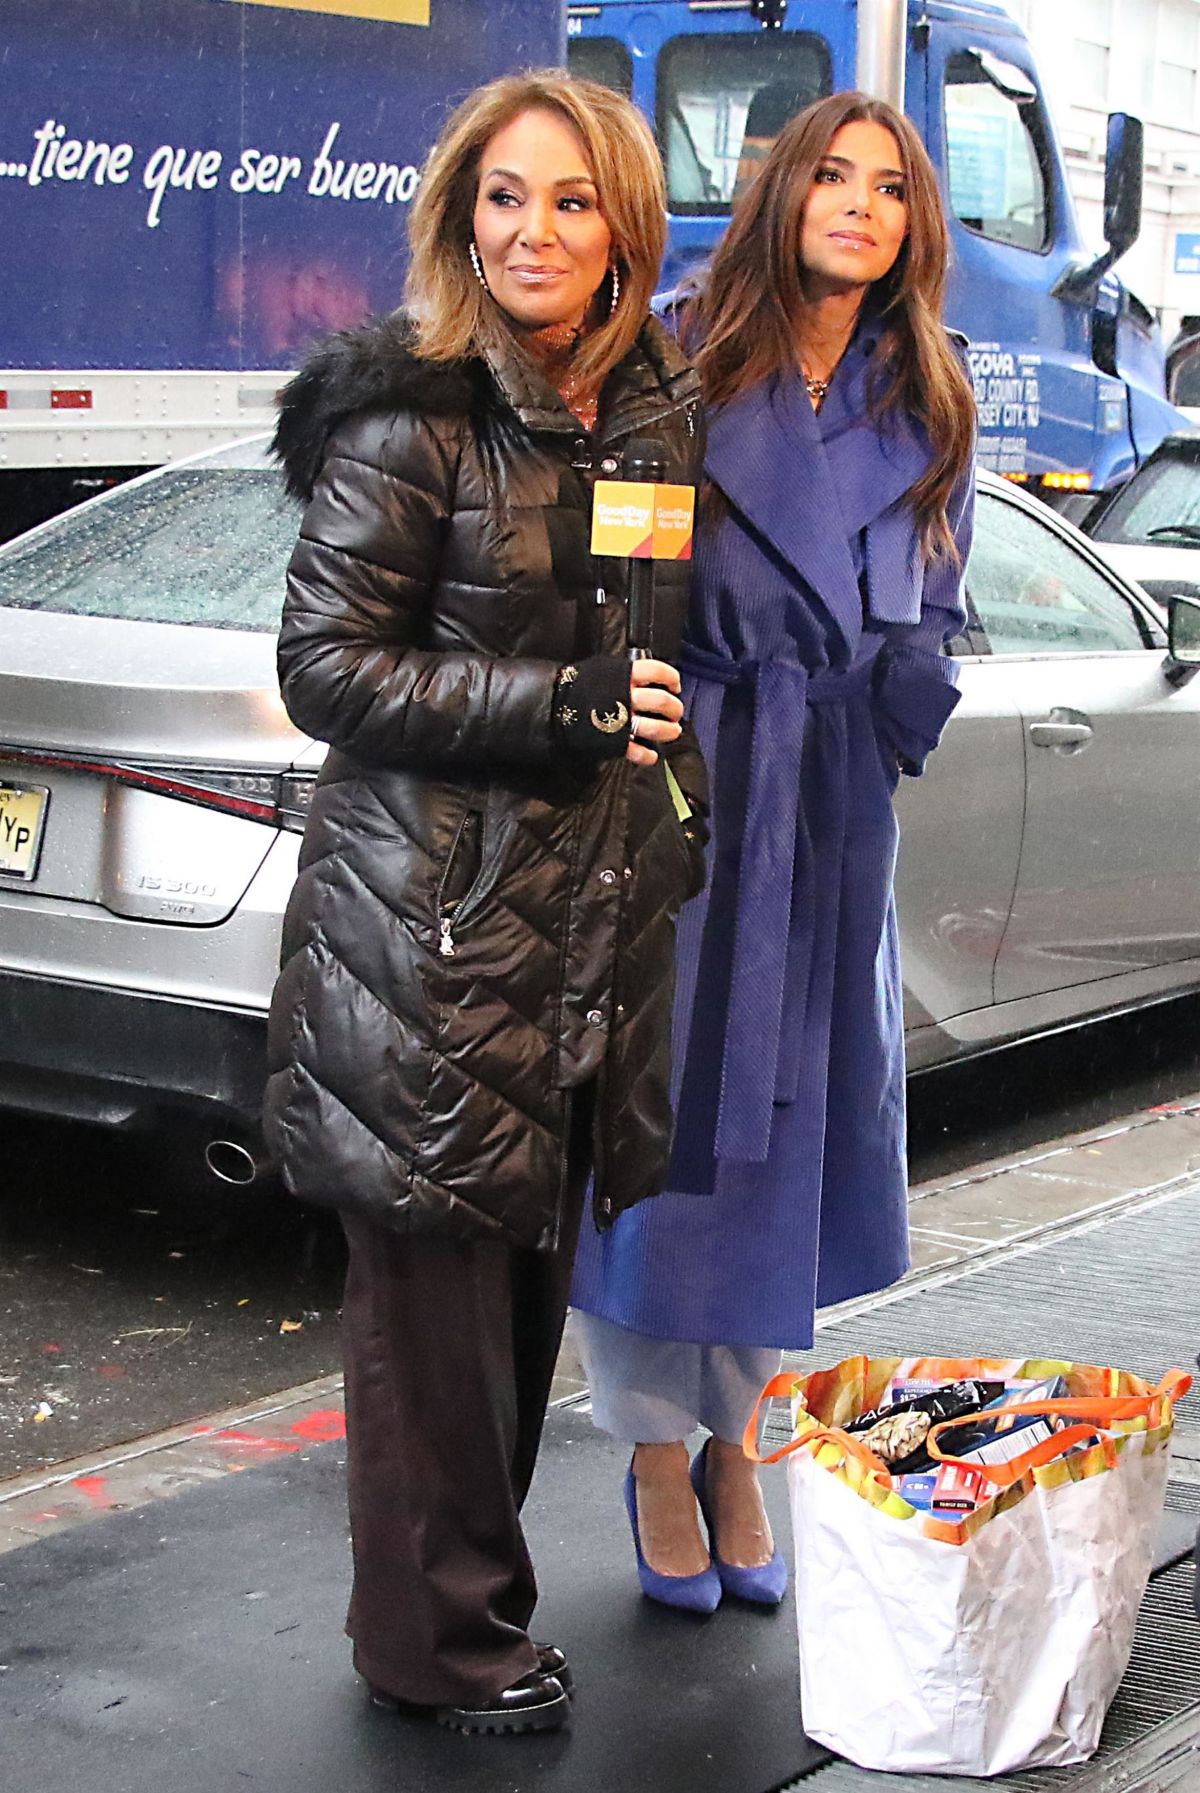 Rosanna Scotto And Roselyn Sanchez On The Set Of Good Day New York In New York 12162022 6933